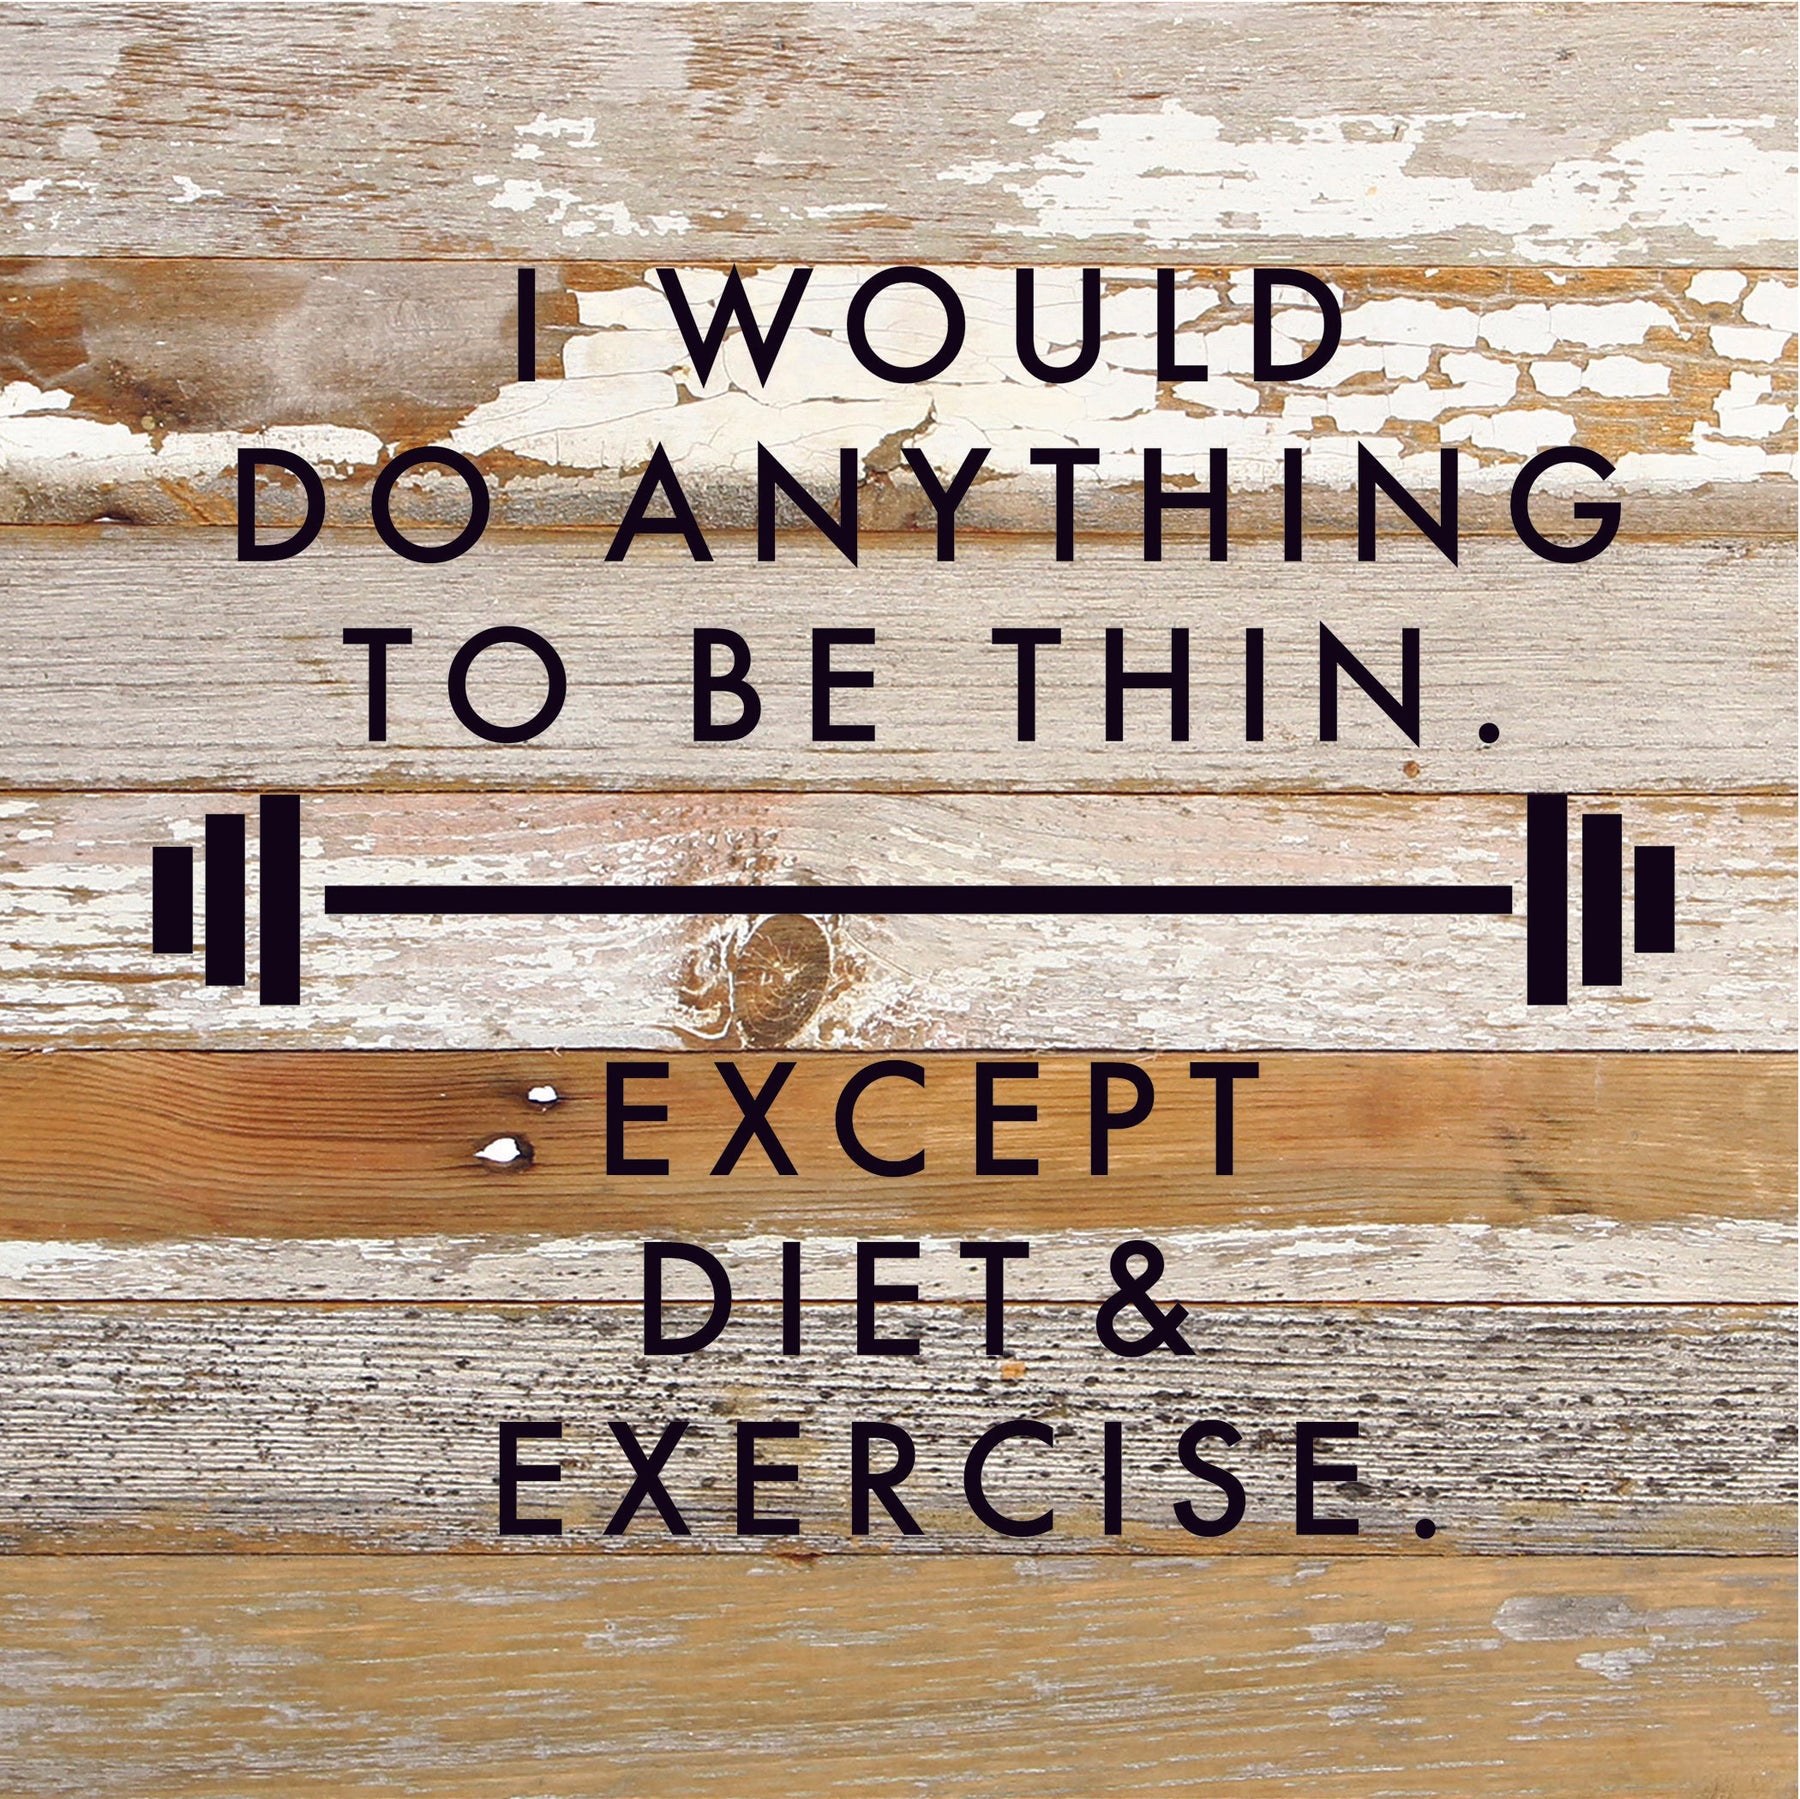 I would do anything to be thin. Except diet and exercise. / 10x10 Reclaimed Wood Sign